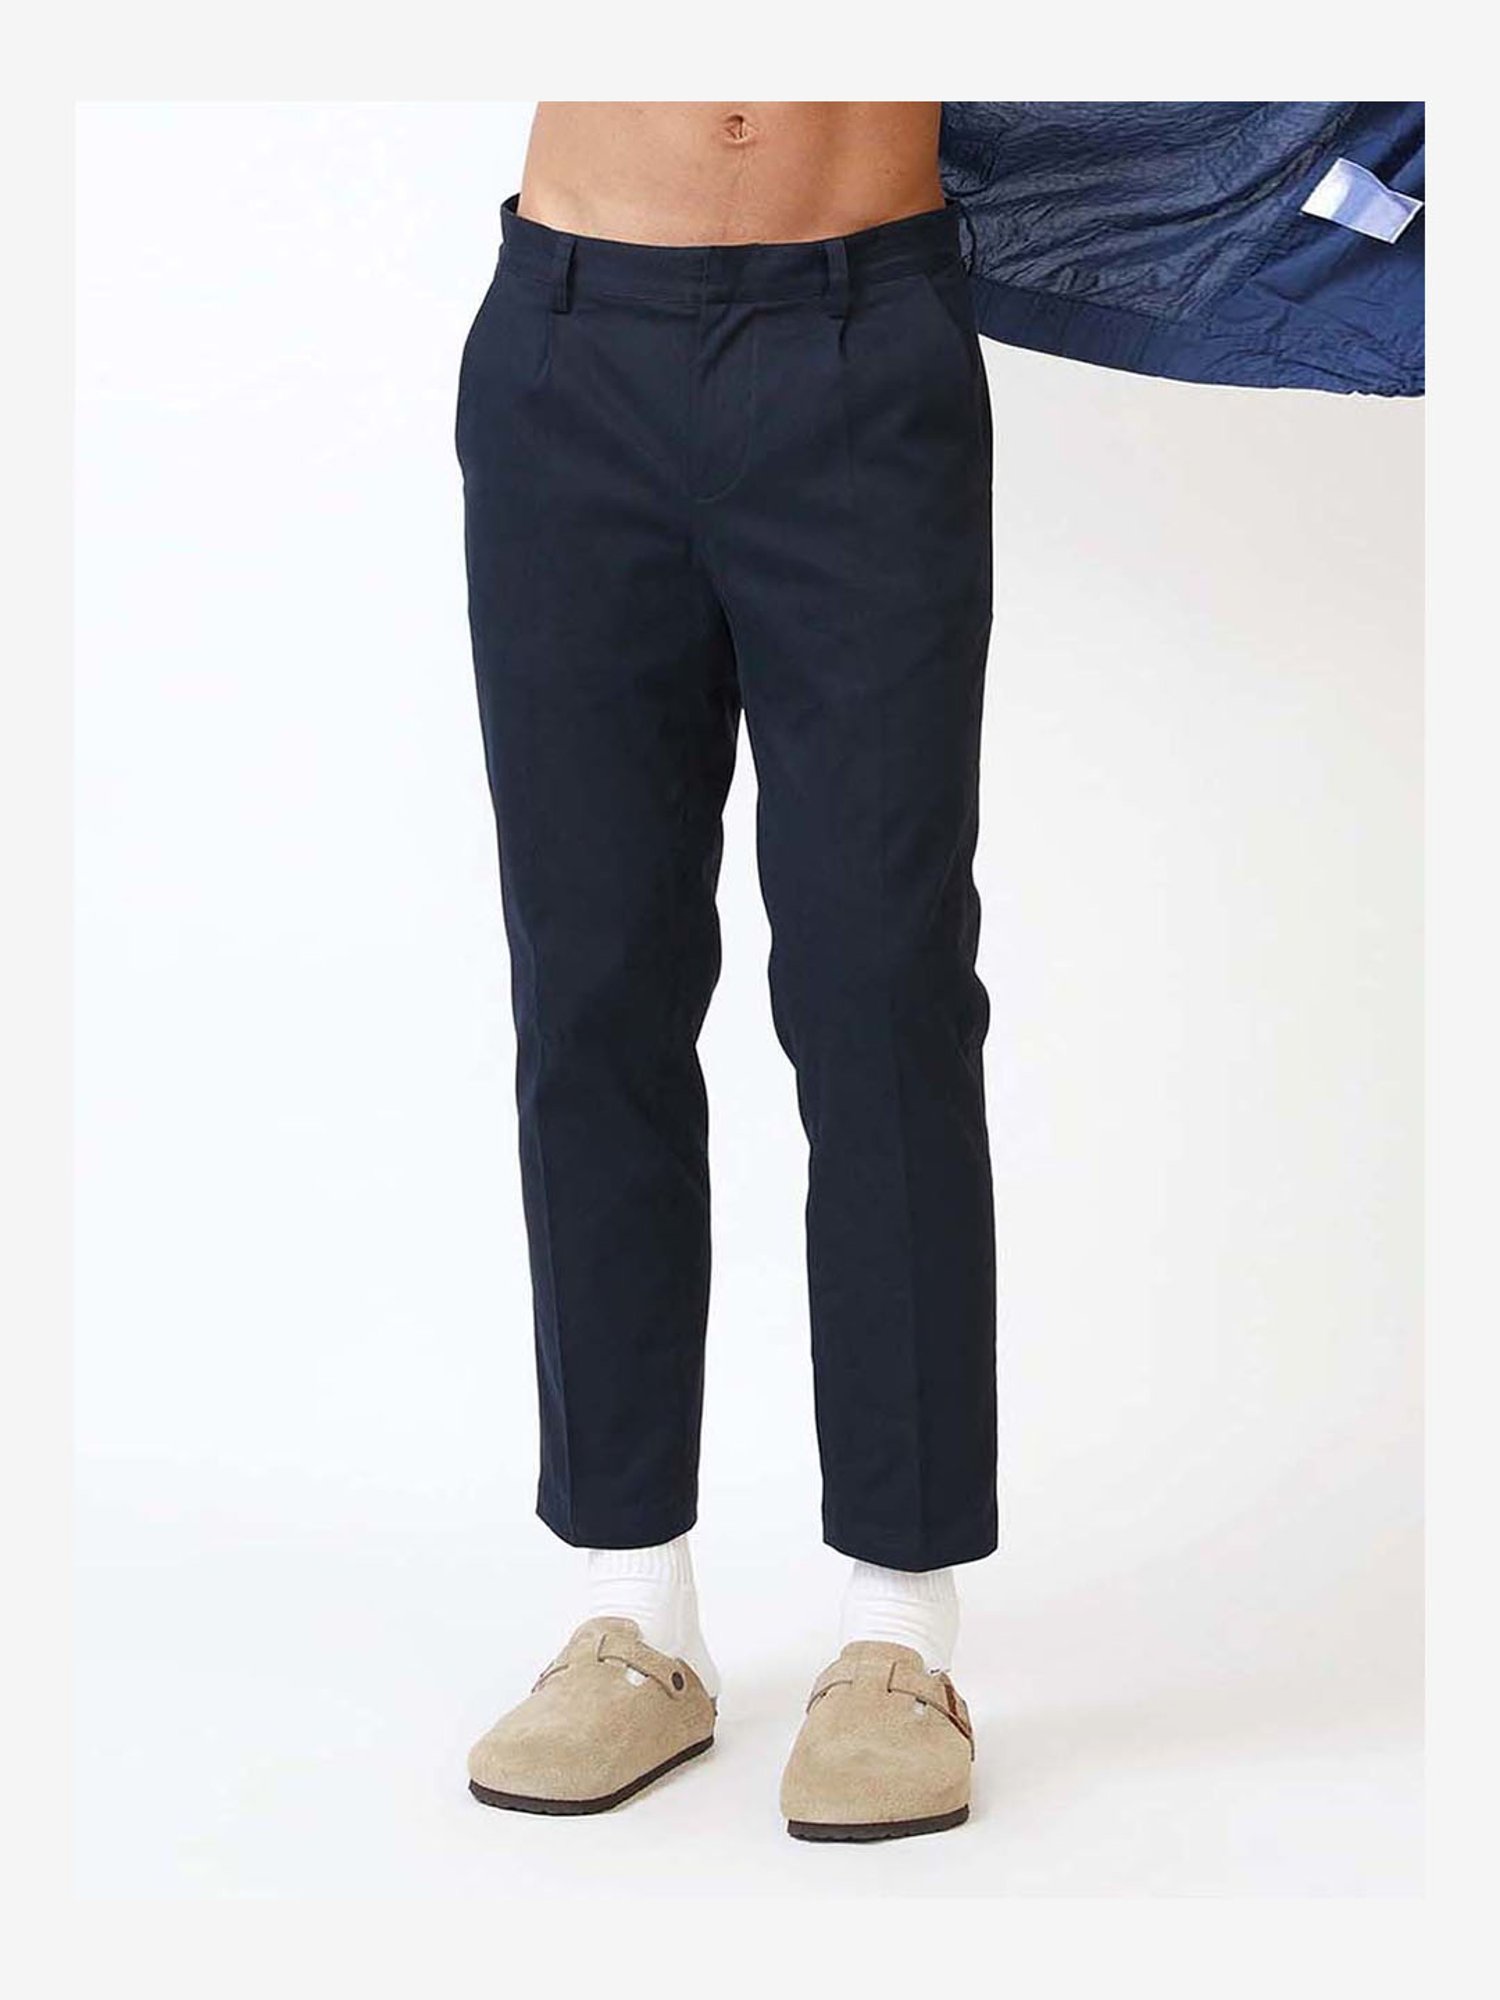 Buy Mens Casual Chinos Trousers Cream Beige and Navy Blue Combo of 3 PV  Cotton for Best Price, Reviews, Free Shipping